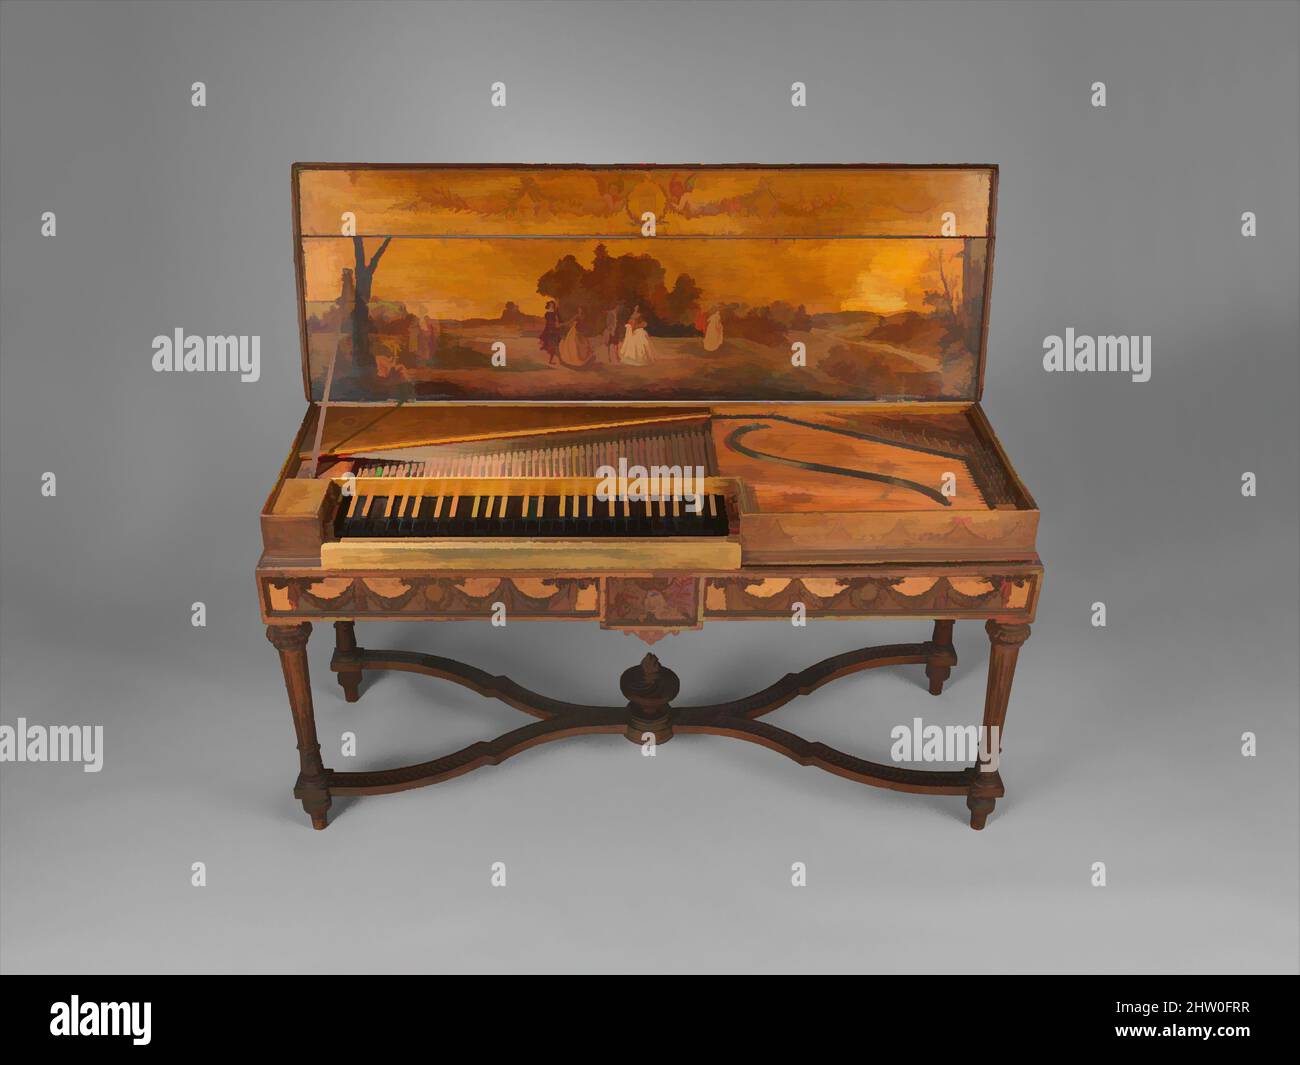 Art inspired by Clavichord, 1763, Neuwied, Germany, German, Wood, ebony, bone, walnut, paint, metal, Height (of case, without lid): 4 in. (10.1 cm), Chordophone-Zither-struck-clavichord, Attributed to Christian Kintzing (German, Neuwied 1707–1804 Neuwied), Clavichords were built as far, Classic works modernized by Artotop with a splash of modernity. Shapes, color and value, eye-catching visual impact on art. Emotions through freedom of artworks in a contemporary way. A timeless message pursuing a wildly creative new direction. Artists turning to the digital medium and creating the Artotop NFT Stock Photo